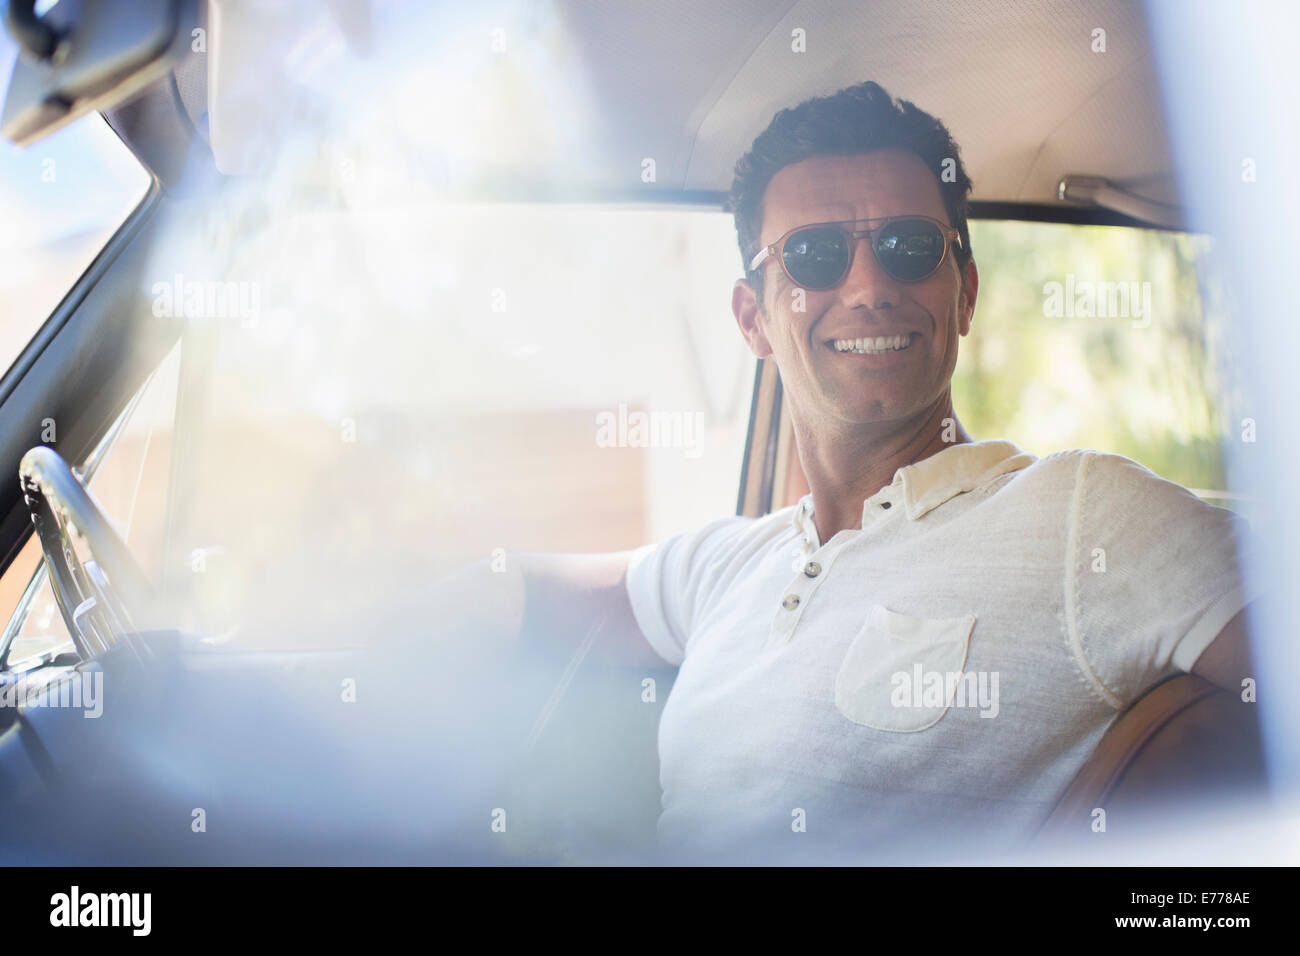 Man driving car on sunny day Stock Photo